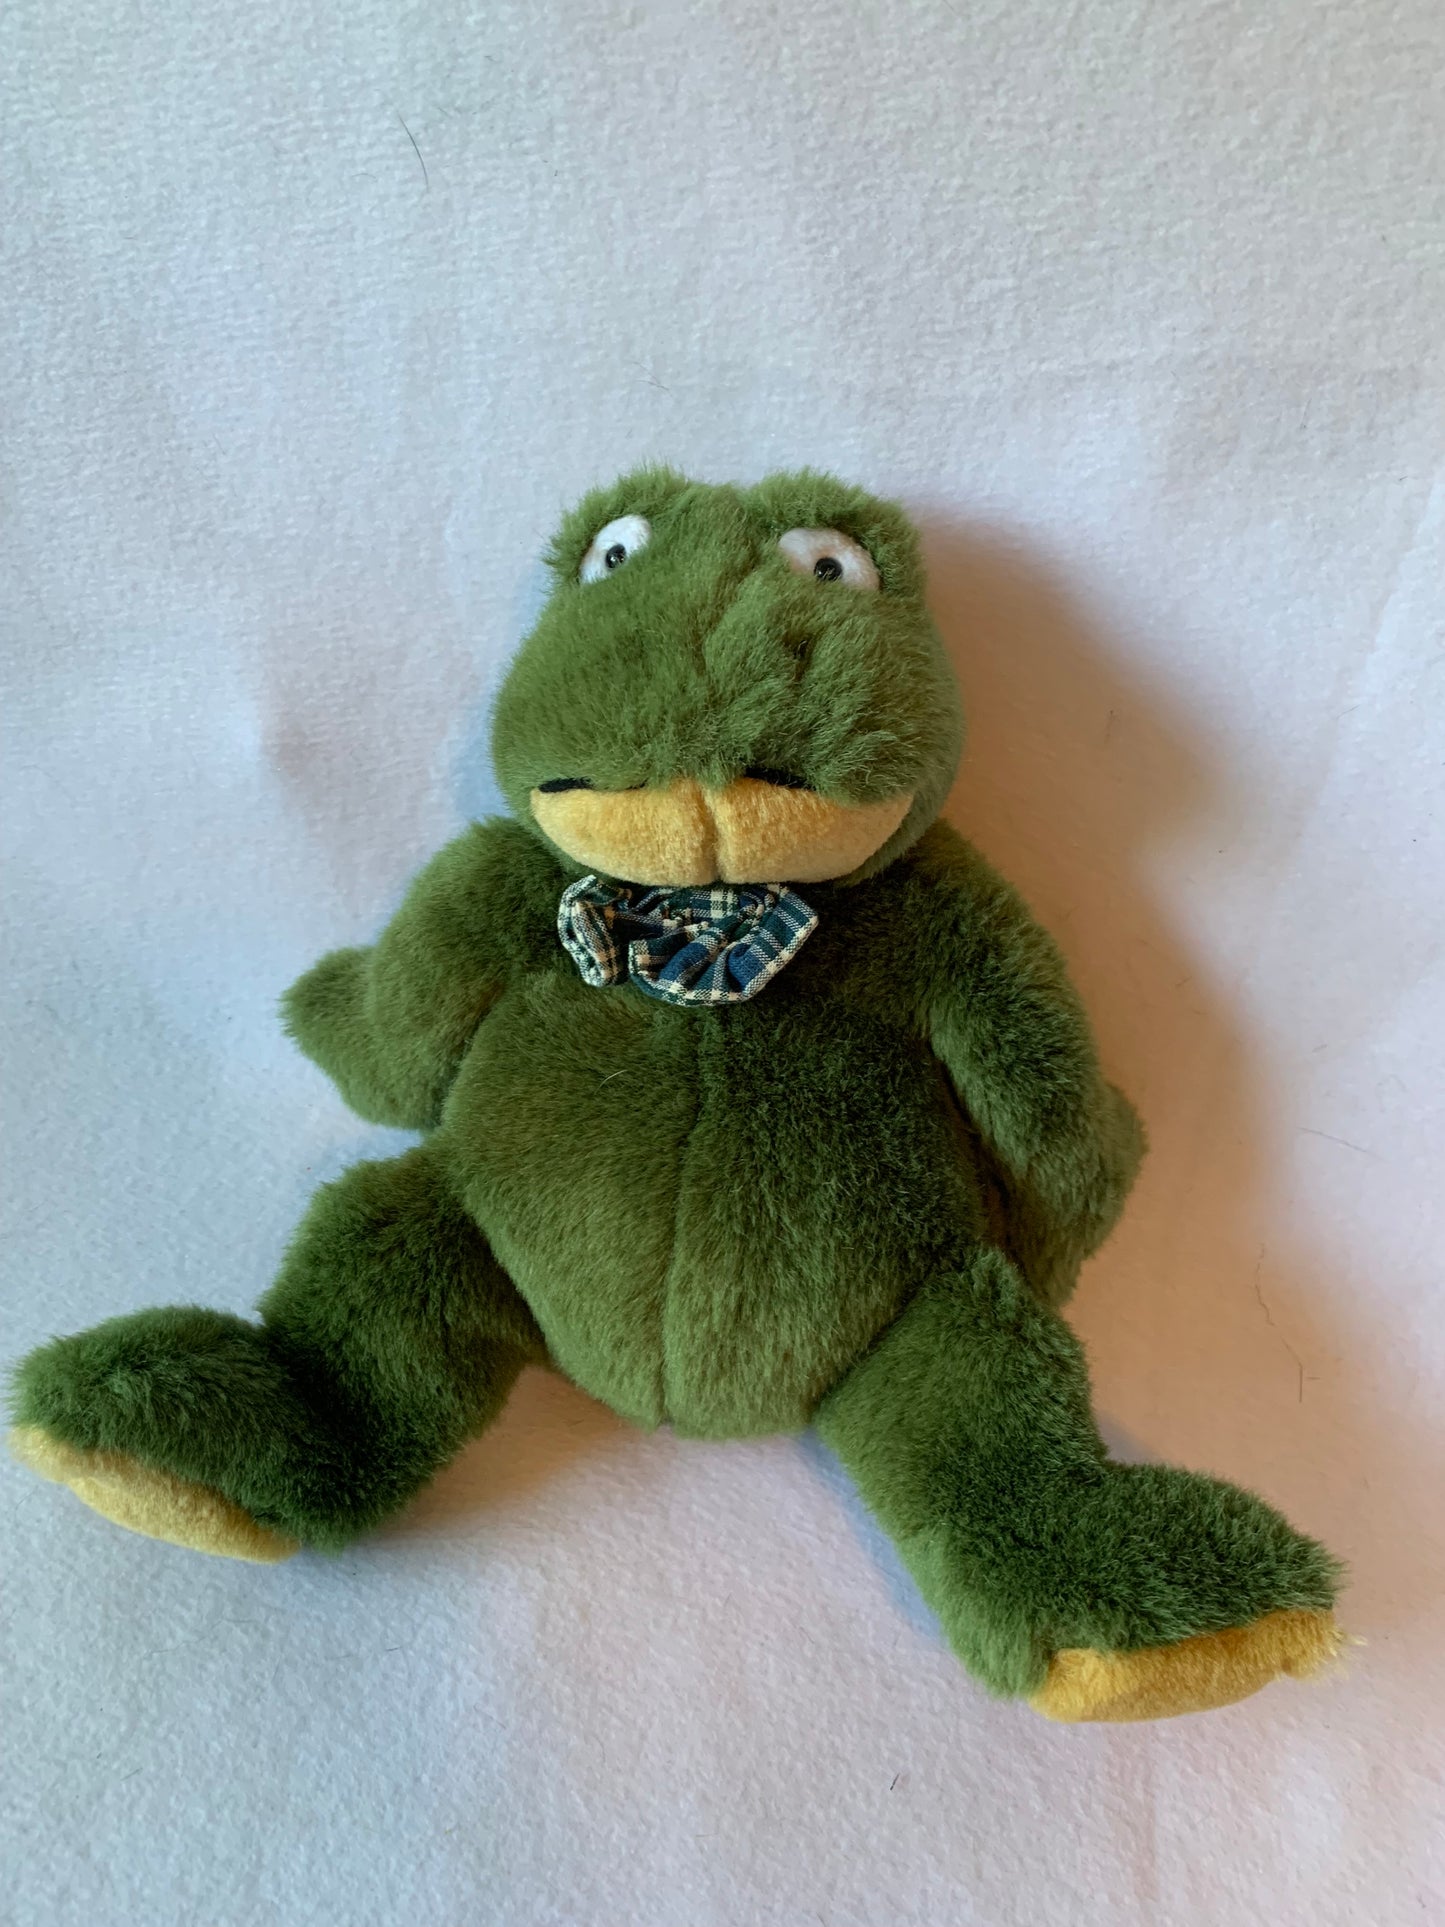 Weighted stuffed animal, frog with 2 lbs, washable plush buddy, various patterns